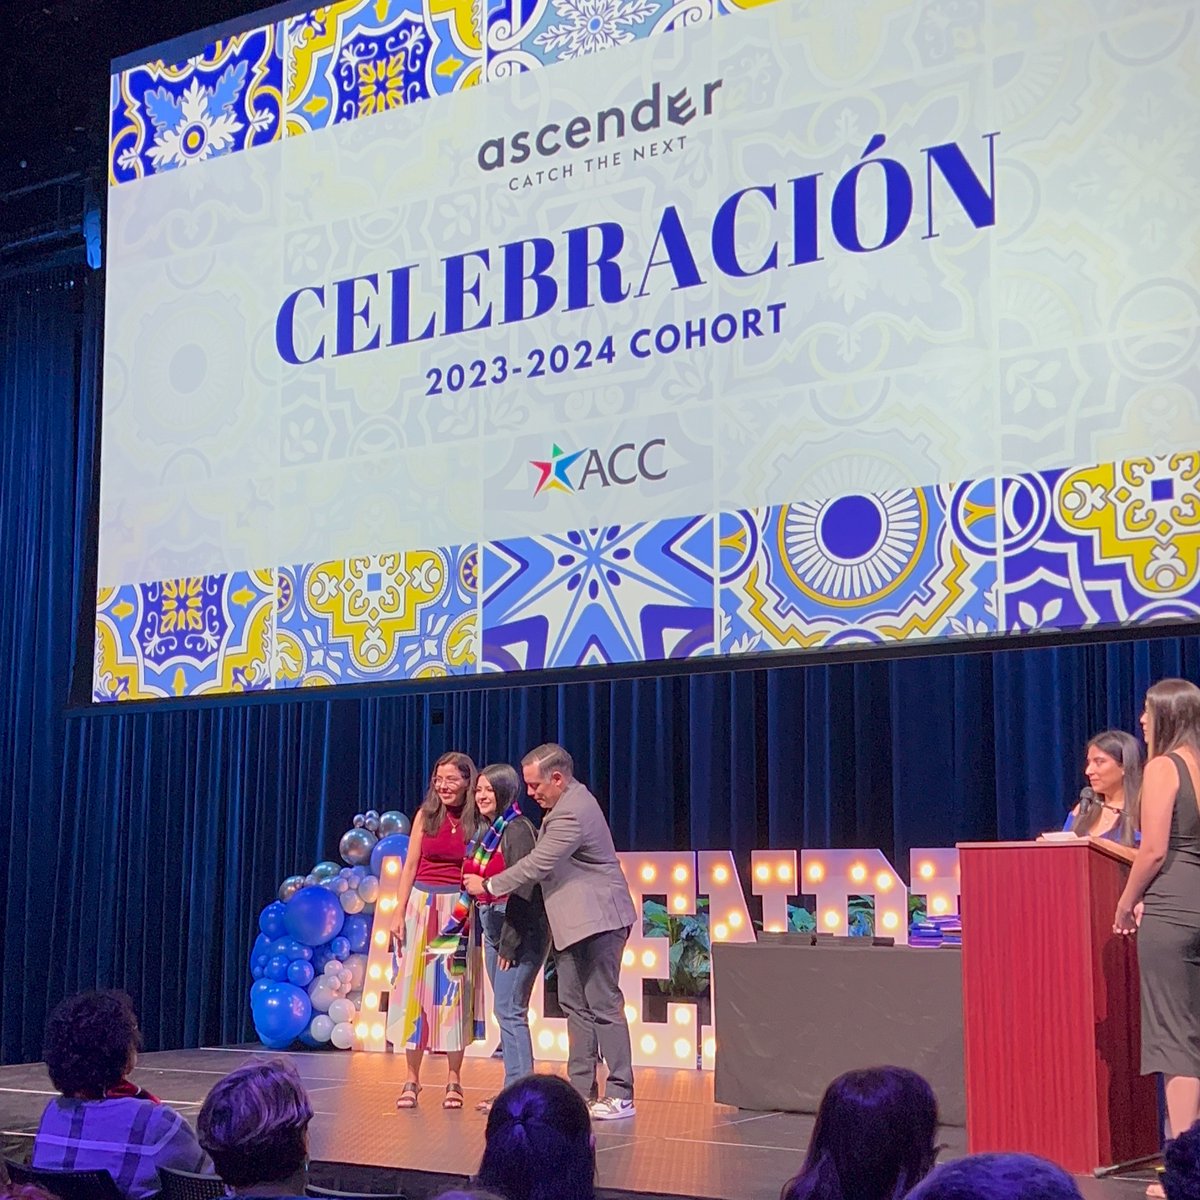 What an incredible night at the 9th annual Celebración! 💜 The success of these Ascender students through their first year of college is an inspiration, and we are so lucky to have gotten to celebrate alongside them last week. 🎉 #ACCproud